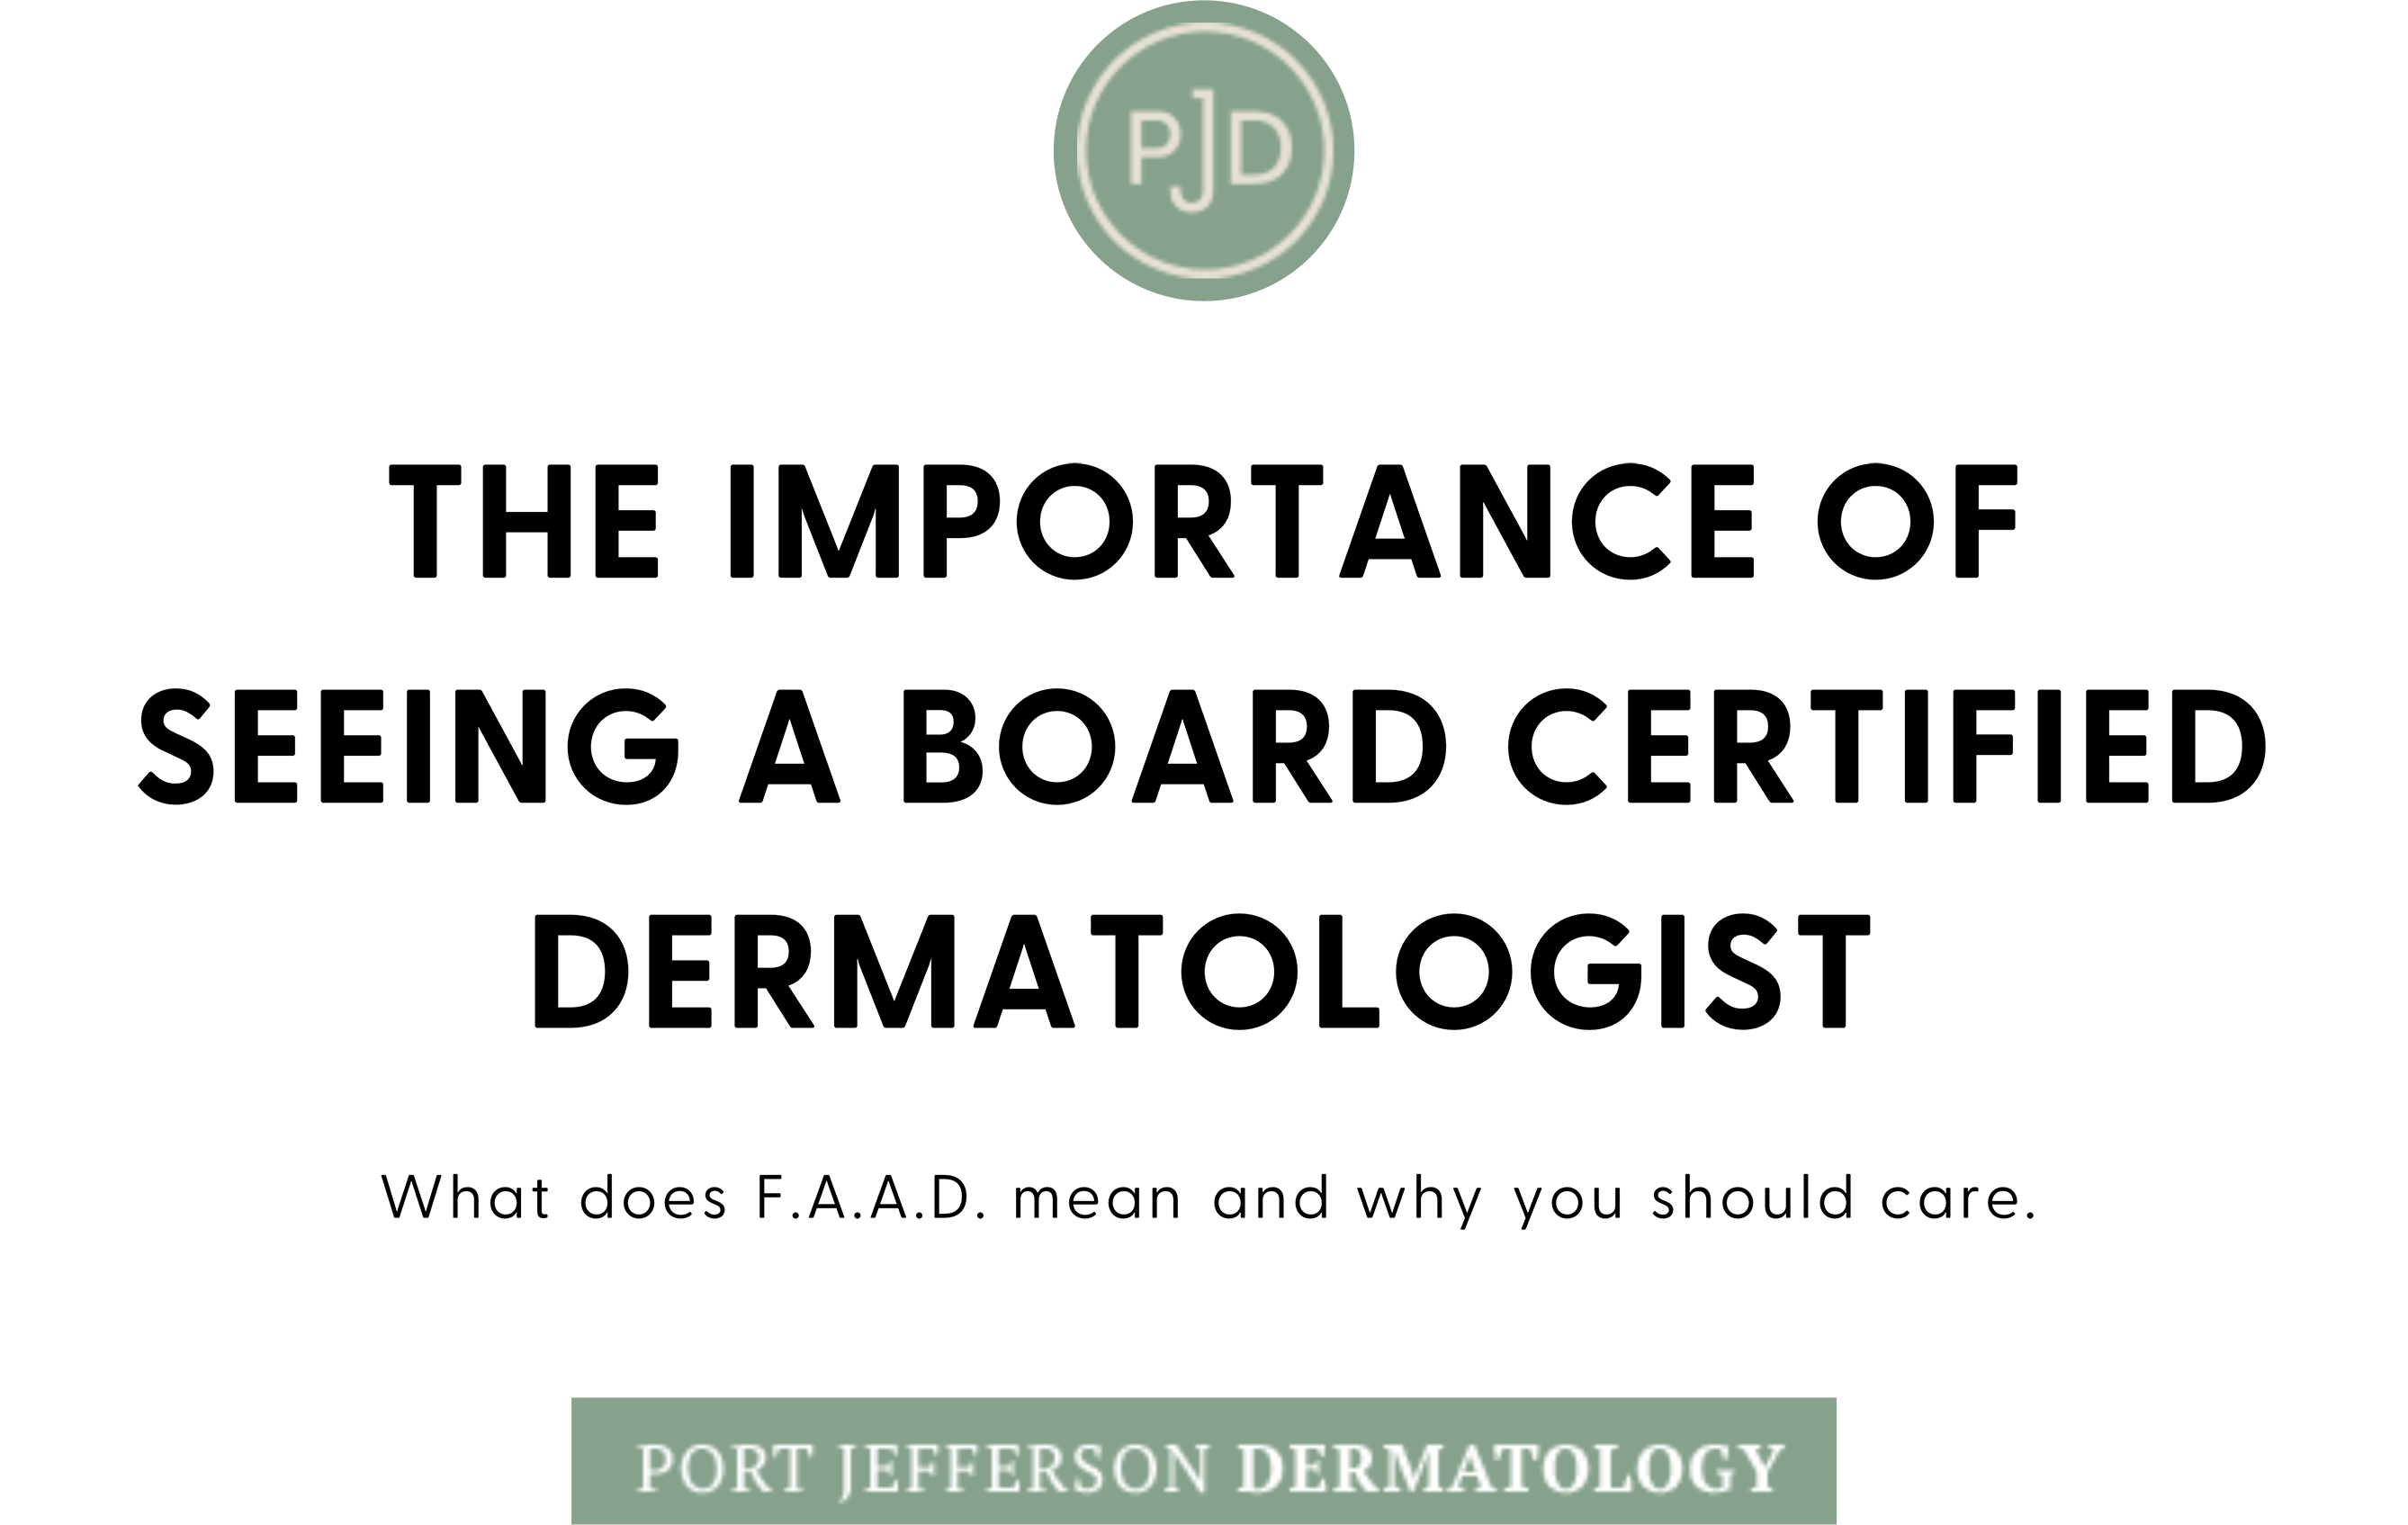 The importance of seeing a board certified dermatologist. What does F.A.A.D. mean and why you should care.